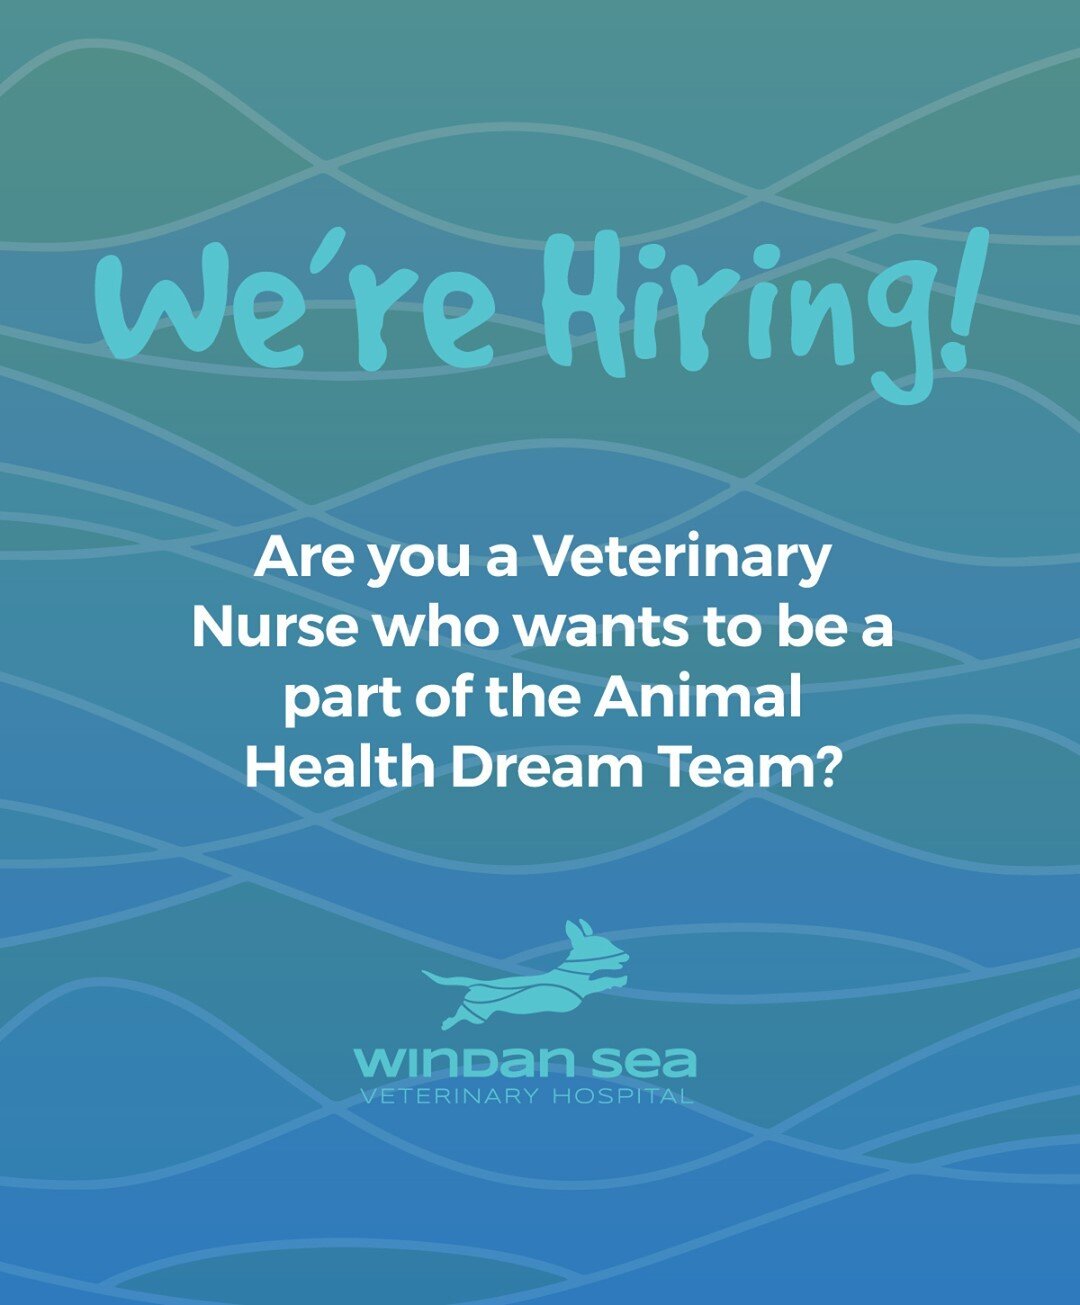 APPLY NOW // We're on the lookout for vet nursing staff to join our team - if you're looking for an environment full of learning &amp; heartfelt care, in a clinic focused on growth and development, head over to the Our Team page on our website &amp; 